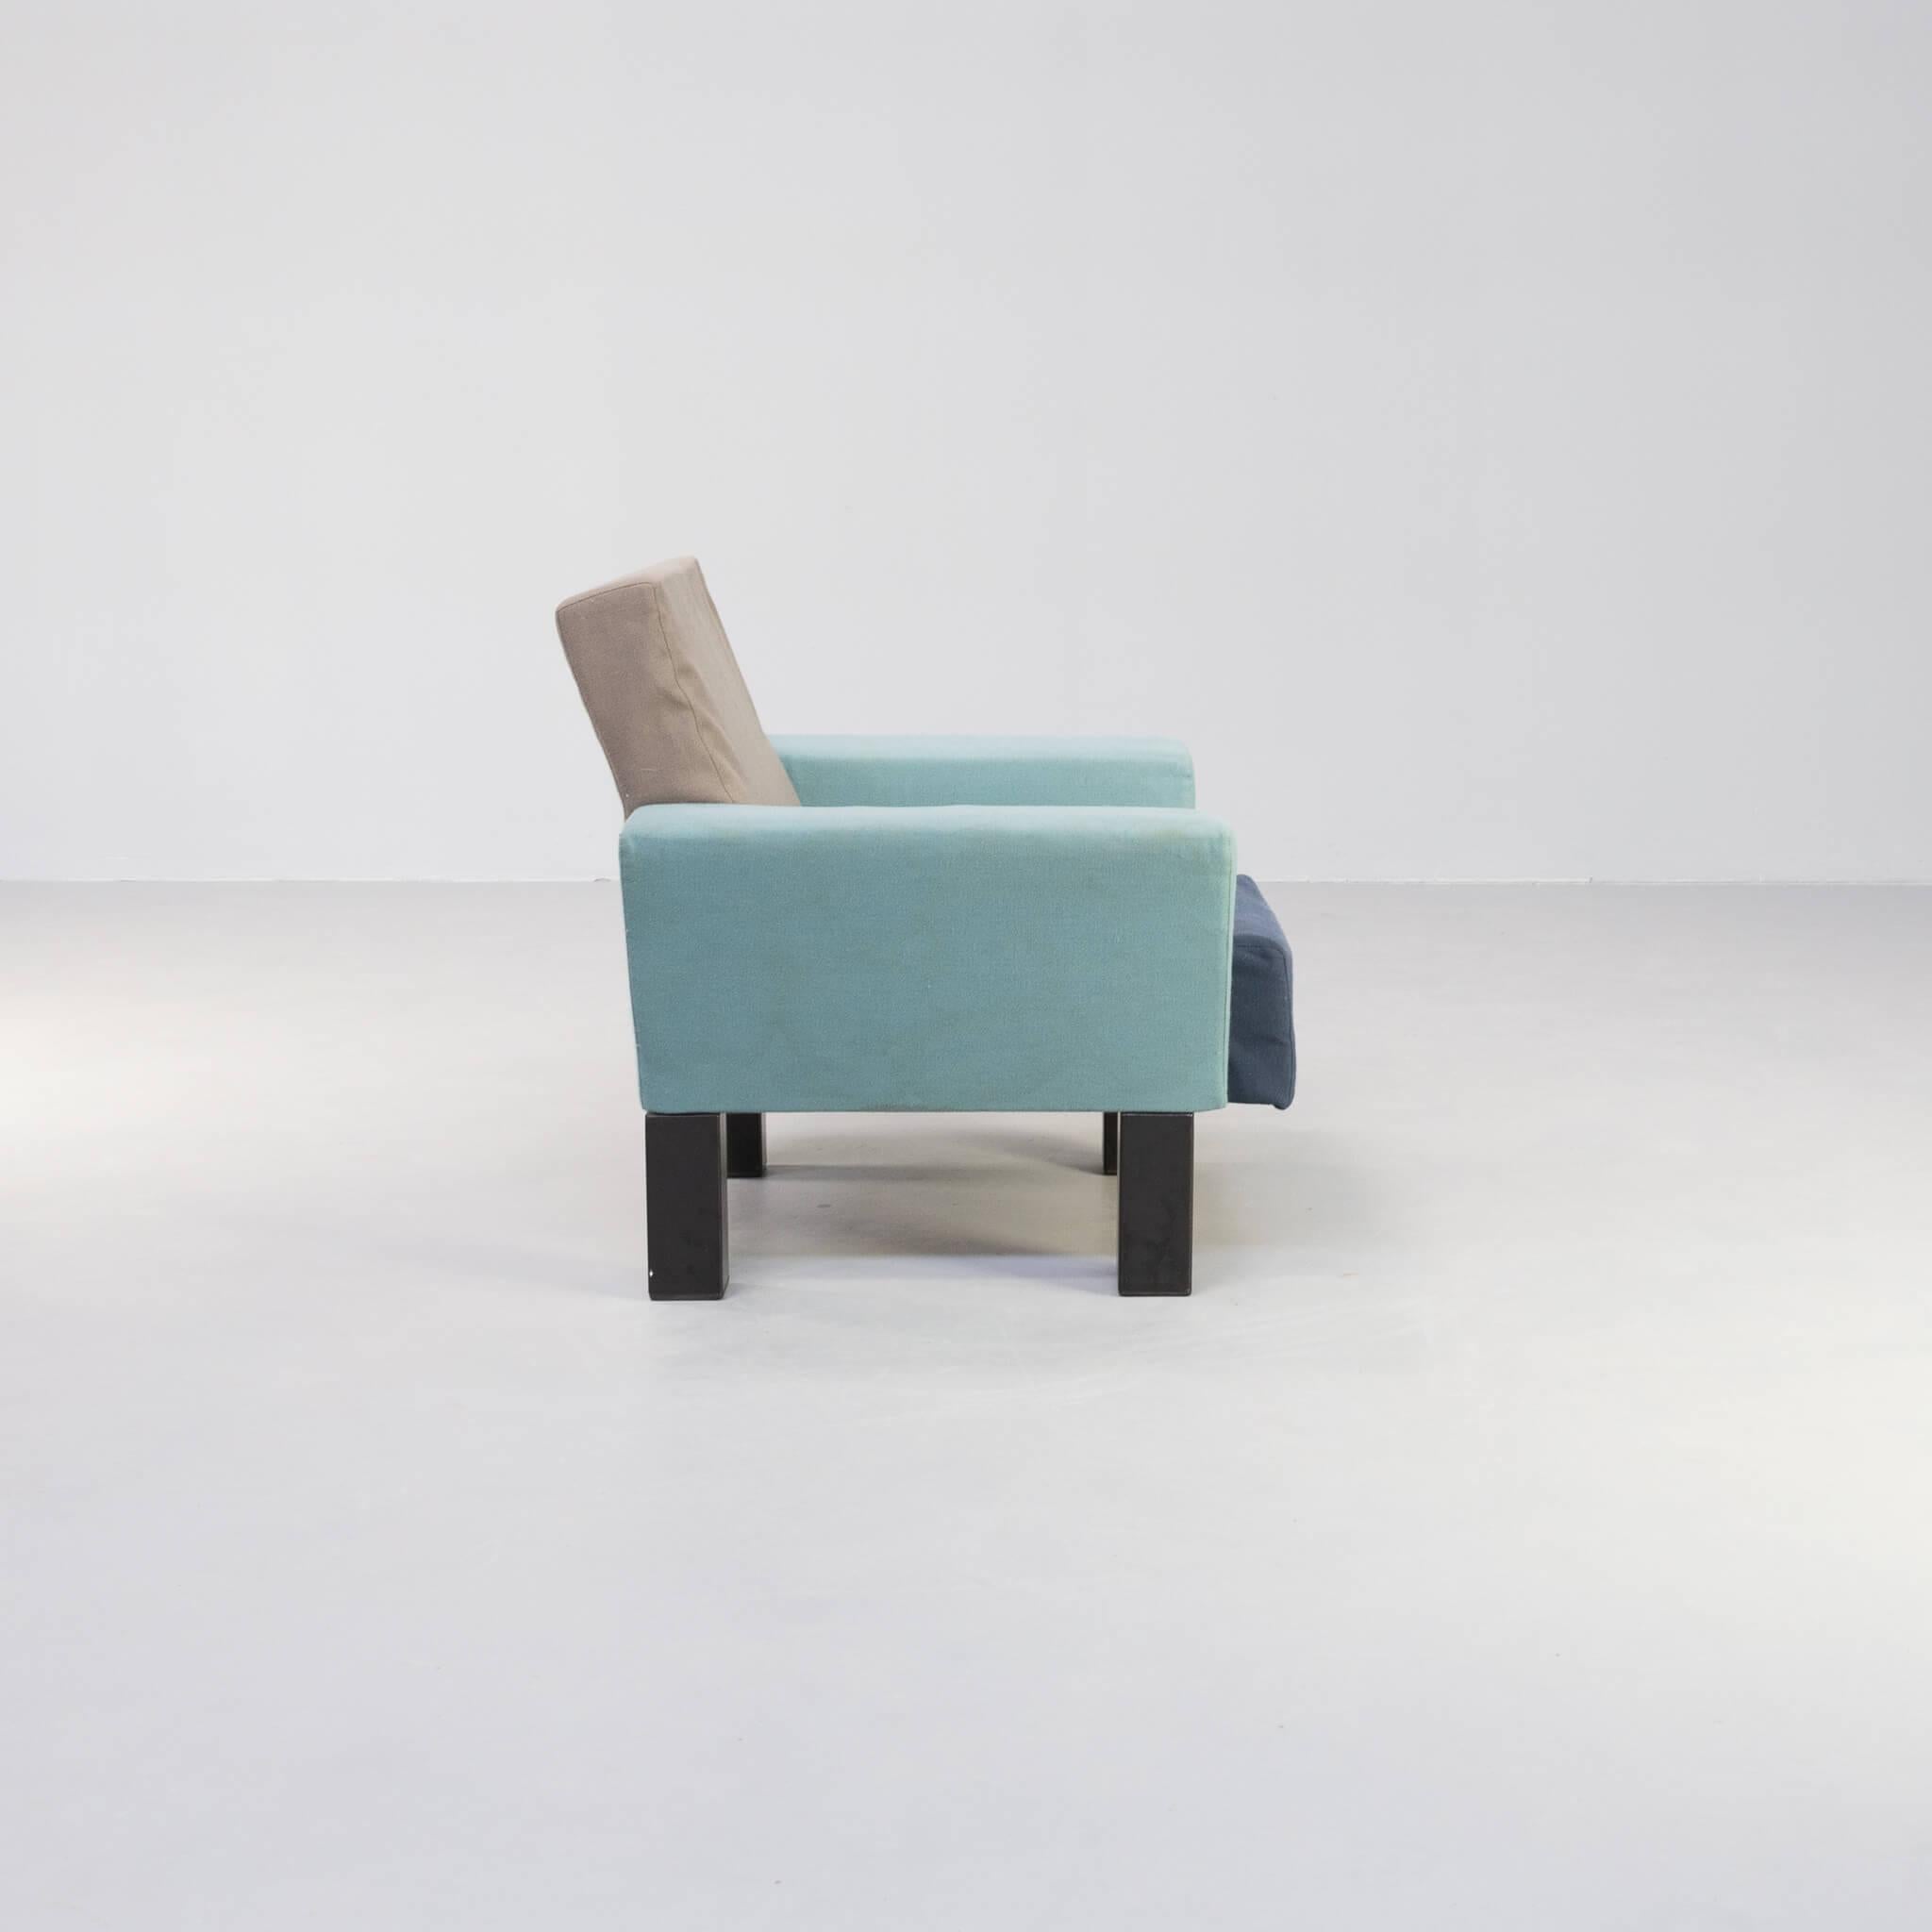 Italian 80s Ettore Sottsass ‘Westside’ Lounge Chair for Knoll For Sale